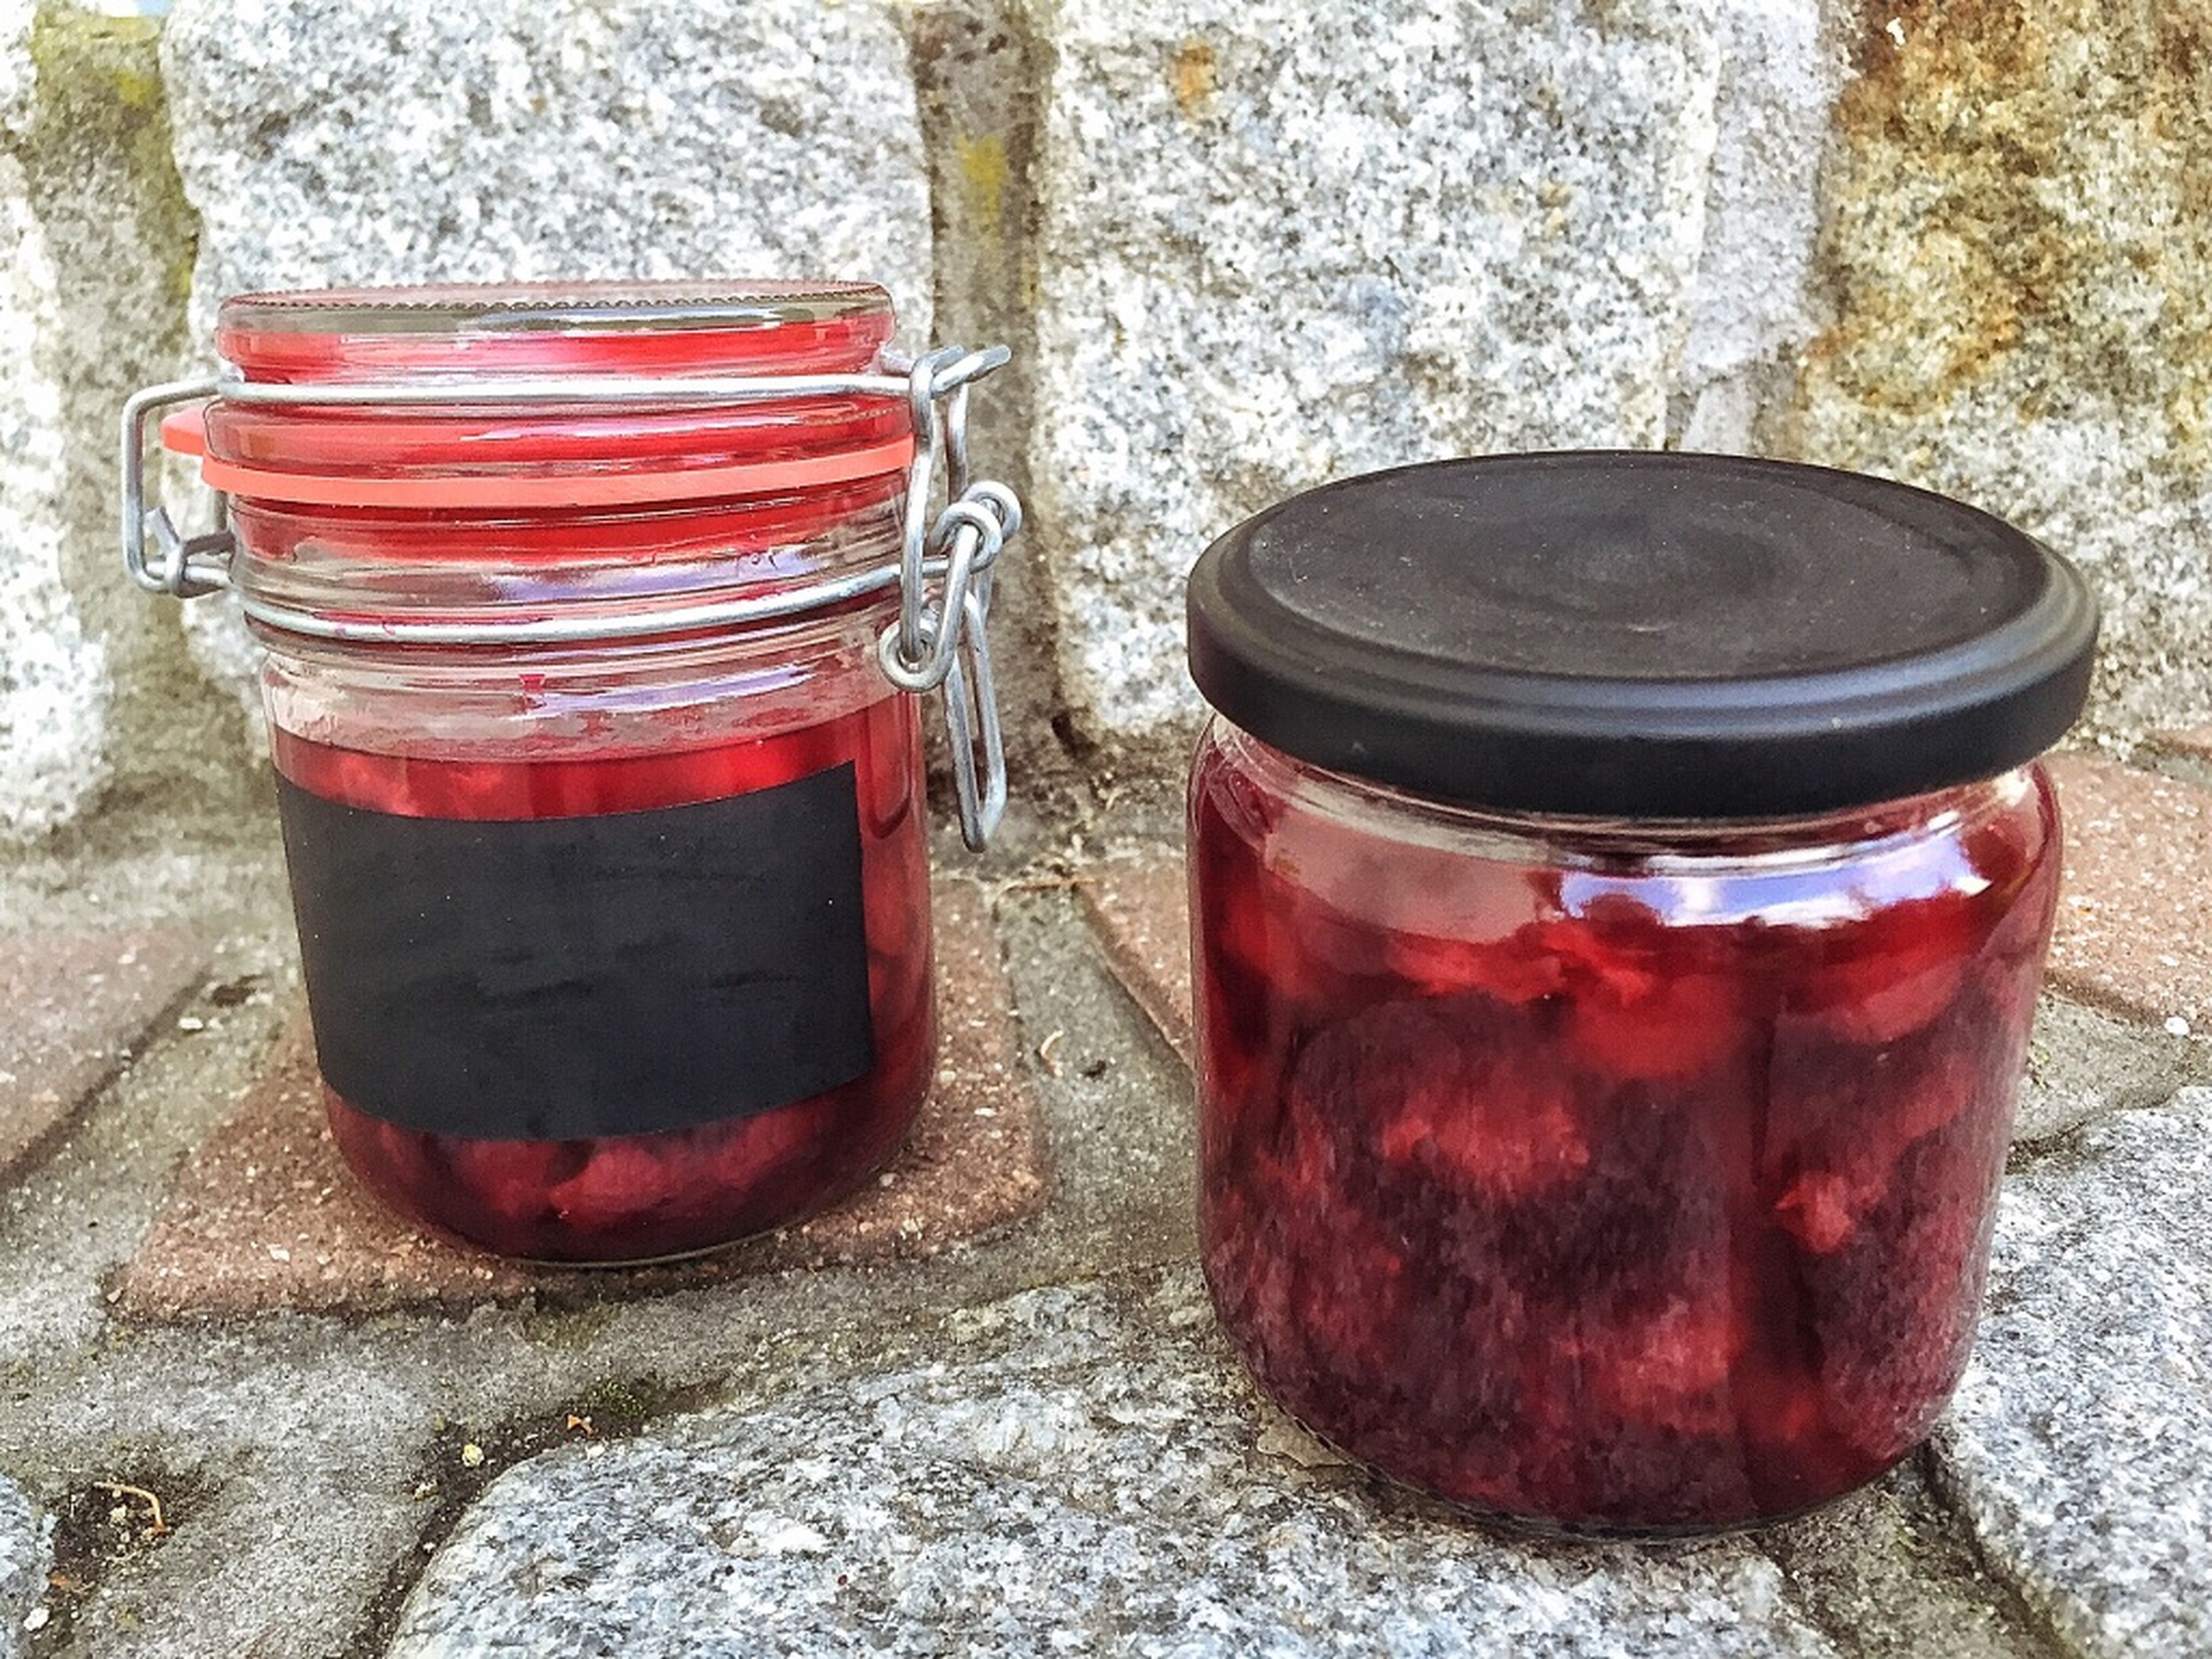 Remove the mint and fill boozy cherry jam into sterilized glass jars. Let the glass jars rest upside down for approx. 10 min., then turn them over again and let cool down. Enjoy!